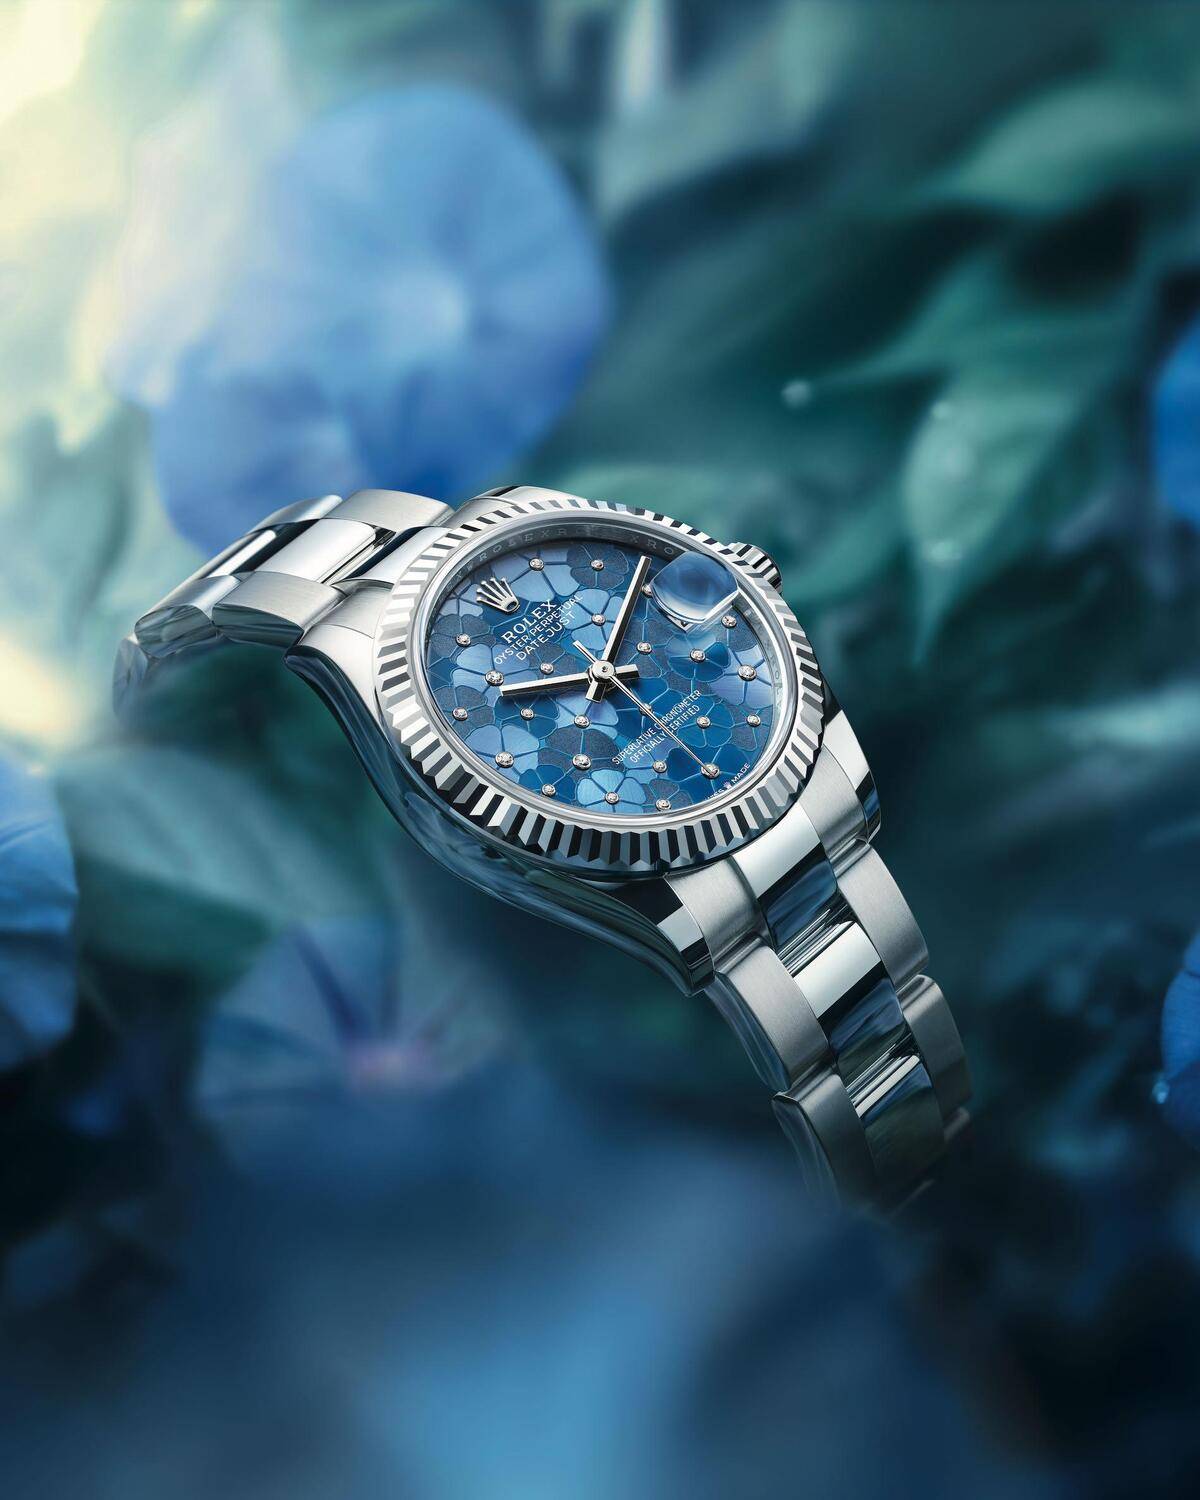 striking-floral-motif-adorns-new-rolex-oyster-perpetual-datejust-31